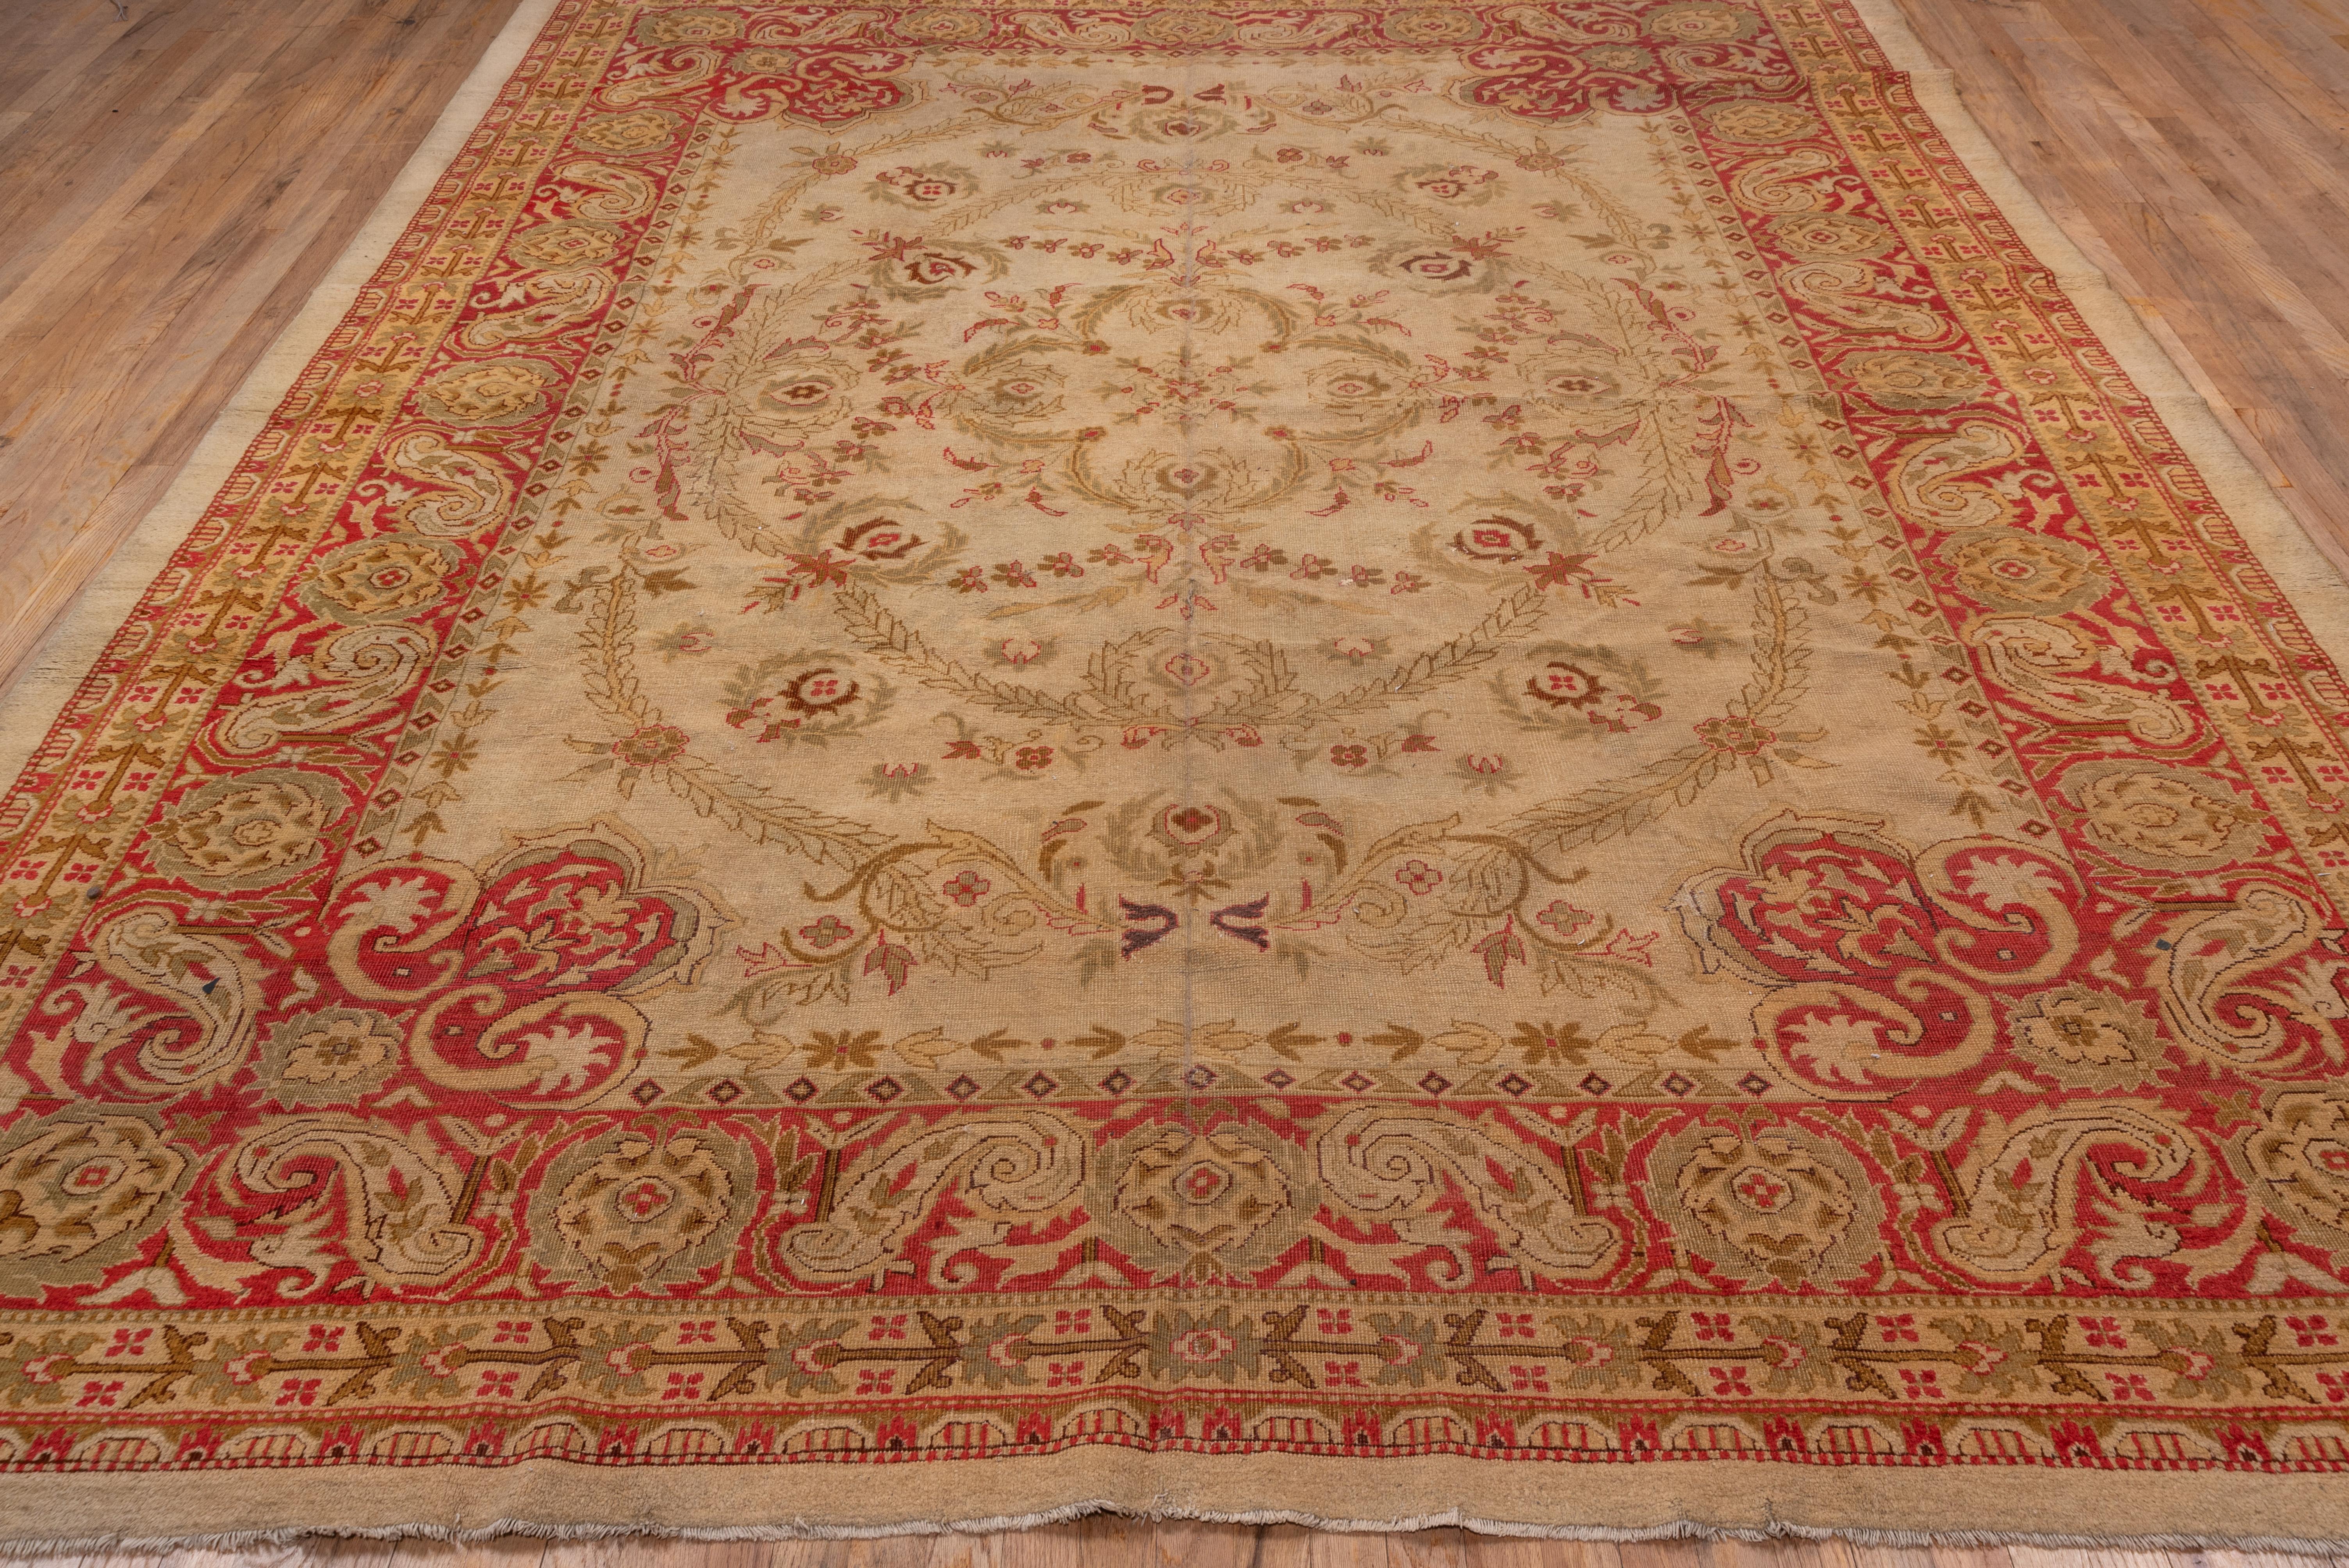 20th Century Antique Indian Agra Carpet, Yellow and Red Tones, 1910s, Red Border For Sale